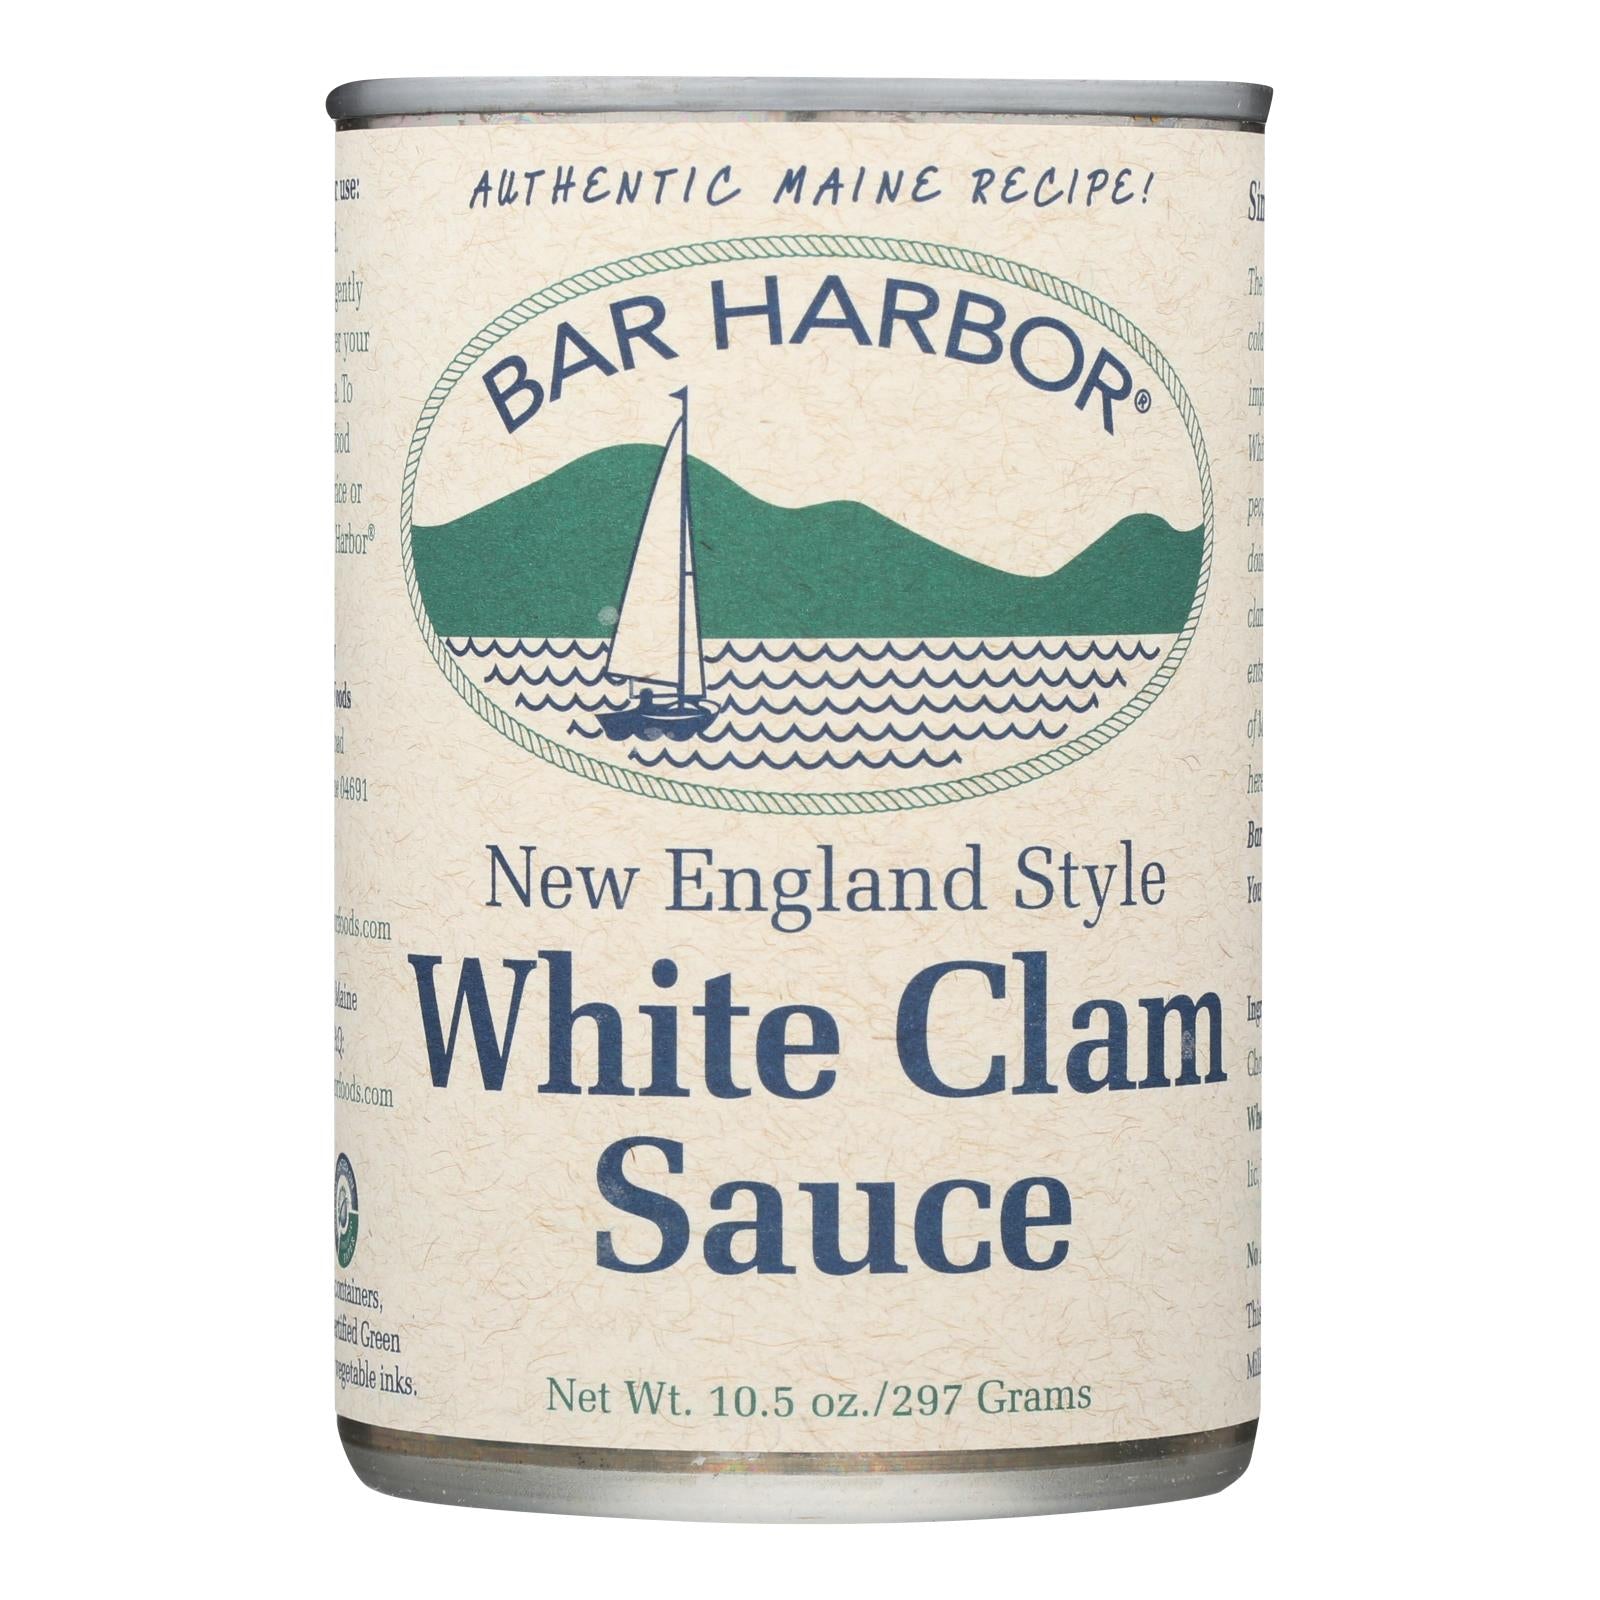 Bar Harbor, Bar Harbor - New England Style White Clam Sauce - Case of 6 - 10.5 oz. (Pack of 6)